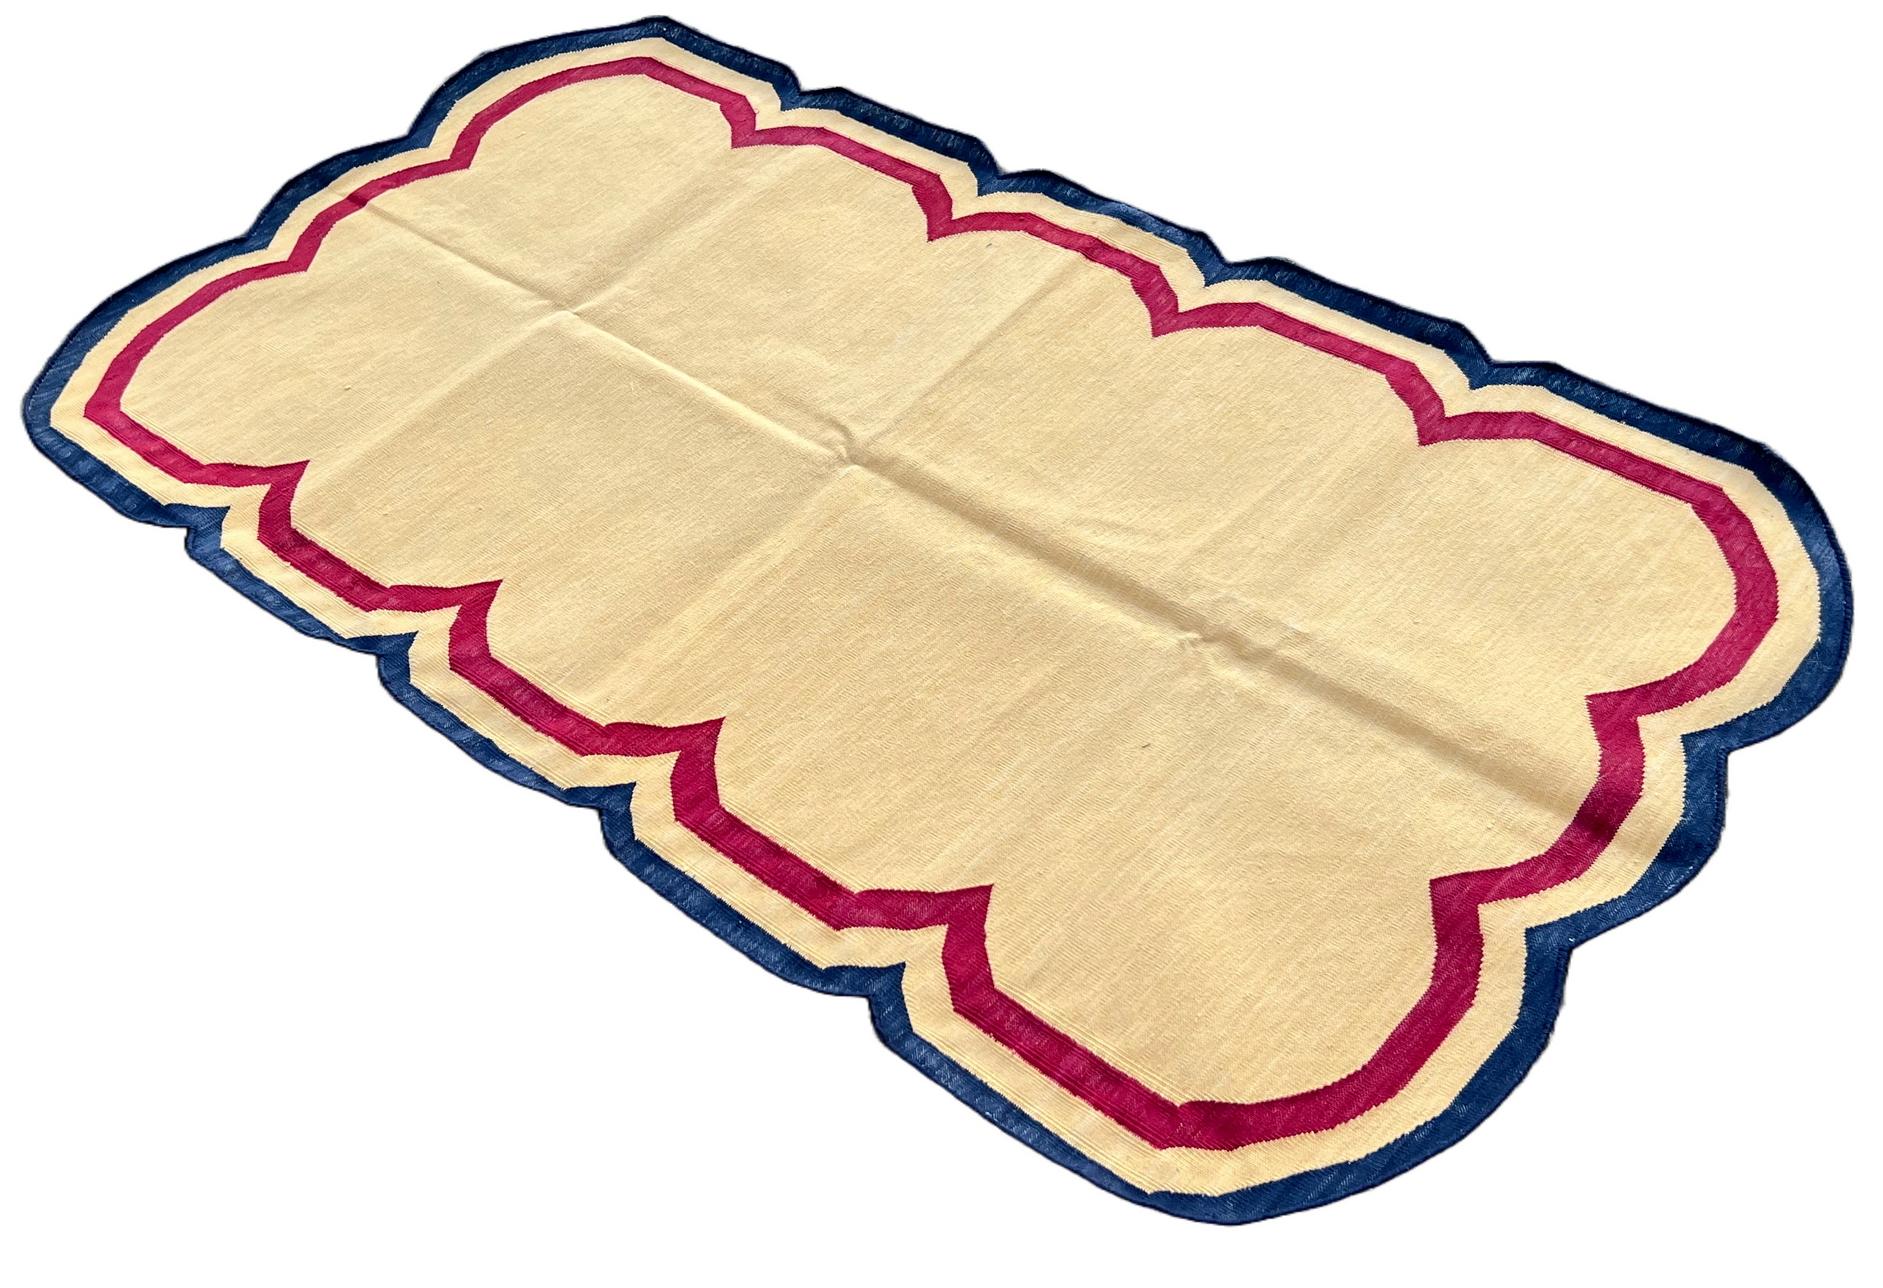 Cotton Vegetable Dyed Cream, Pink And Navy Blue Four Sided Scalloped Rug-3'x5' 
(Scallops runs on all Four Sides)
These special flat-weave dhurries are hand-woven with 15 ply 100% cotton yarn. Due to the special manufacturing techniques used to